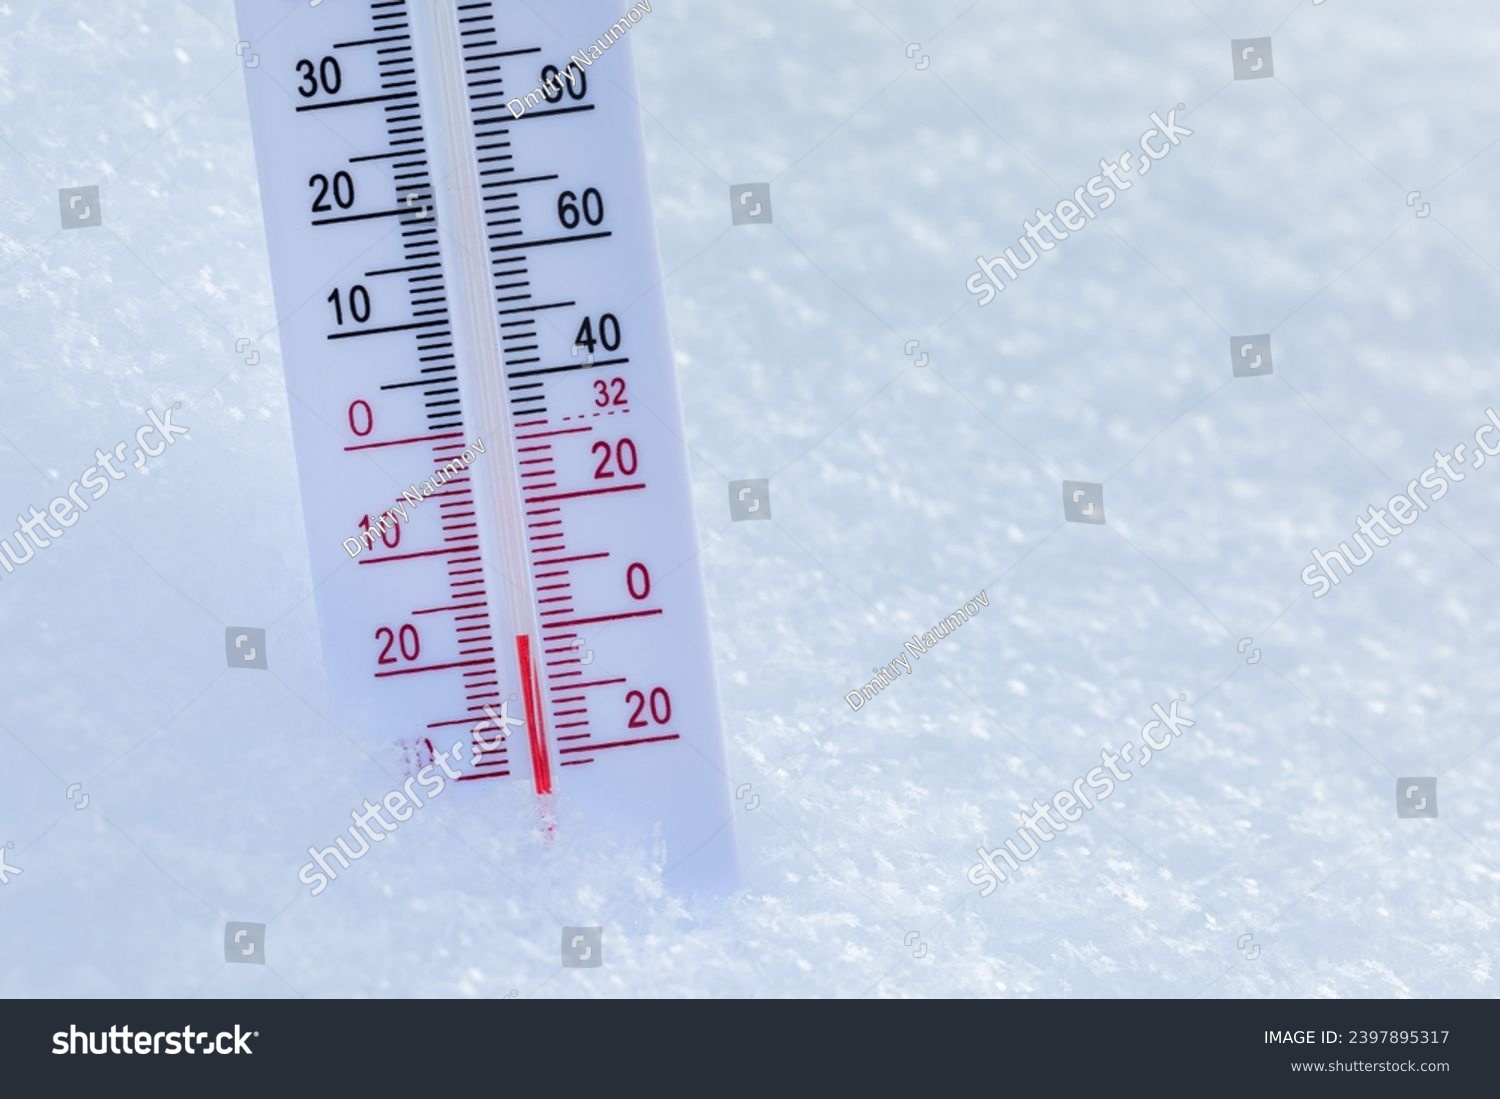 Thermometer with both Celsius and Fahrenheit scales placed in fresh snow indicating freezing cold winter temperature #2397895317